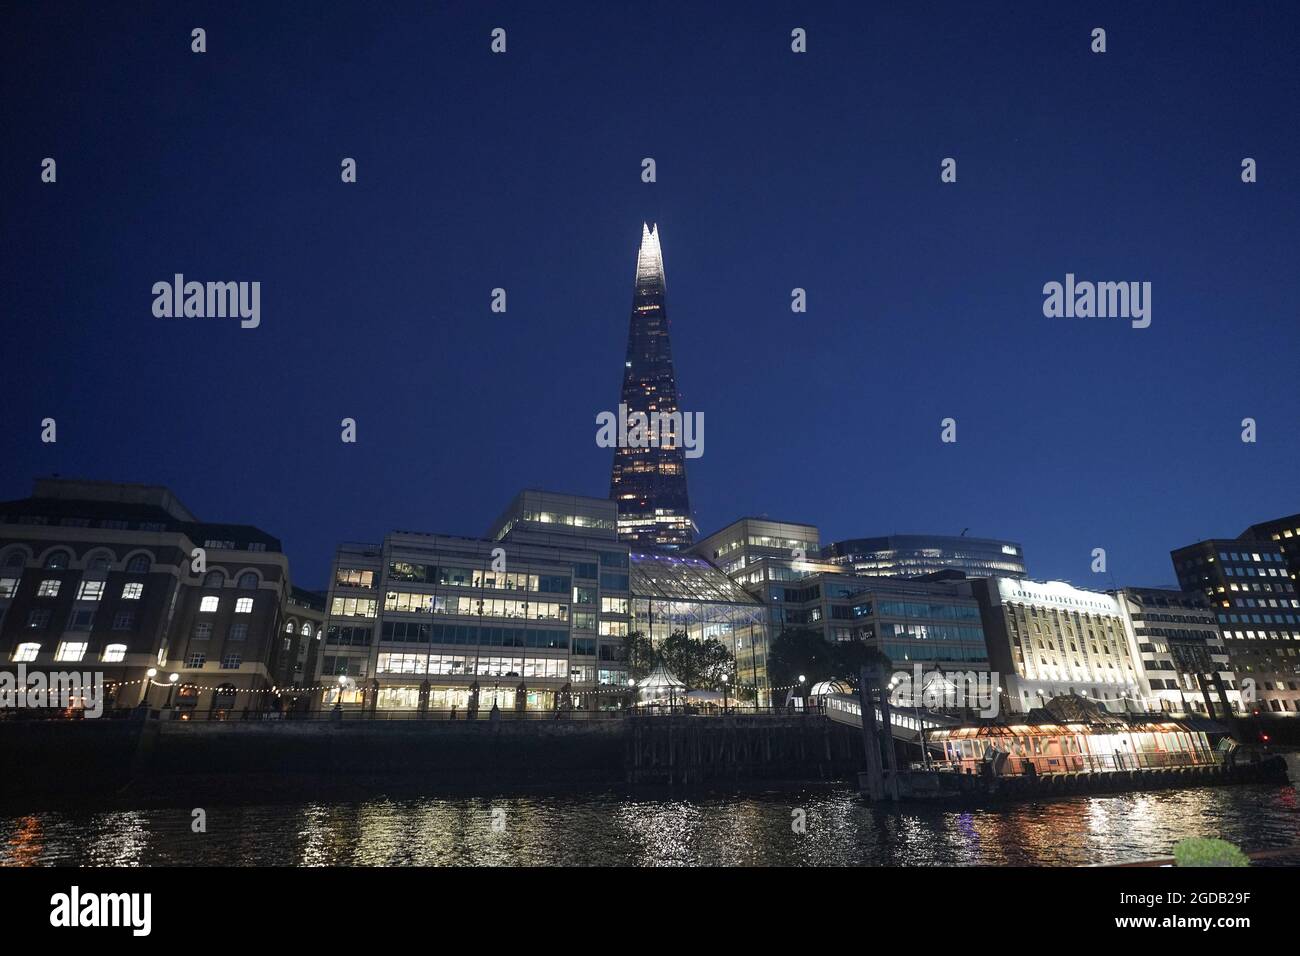 Views of the south-bank London skyline, taken from a boat on the river Thames during an evening cruise. Photo date: Friday, August 6, 2021. Photo: Ric Stock Photo